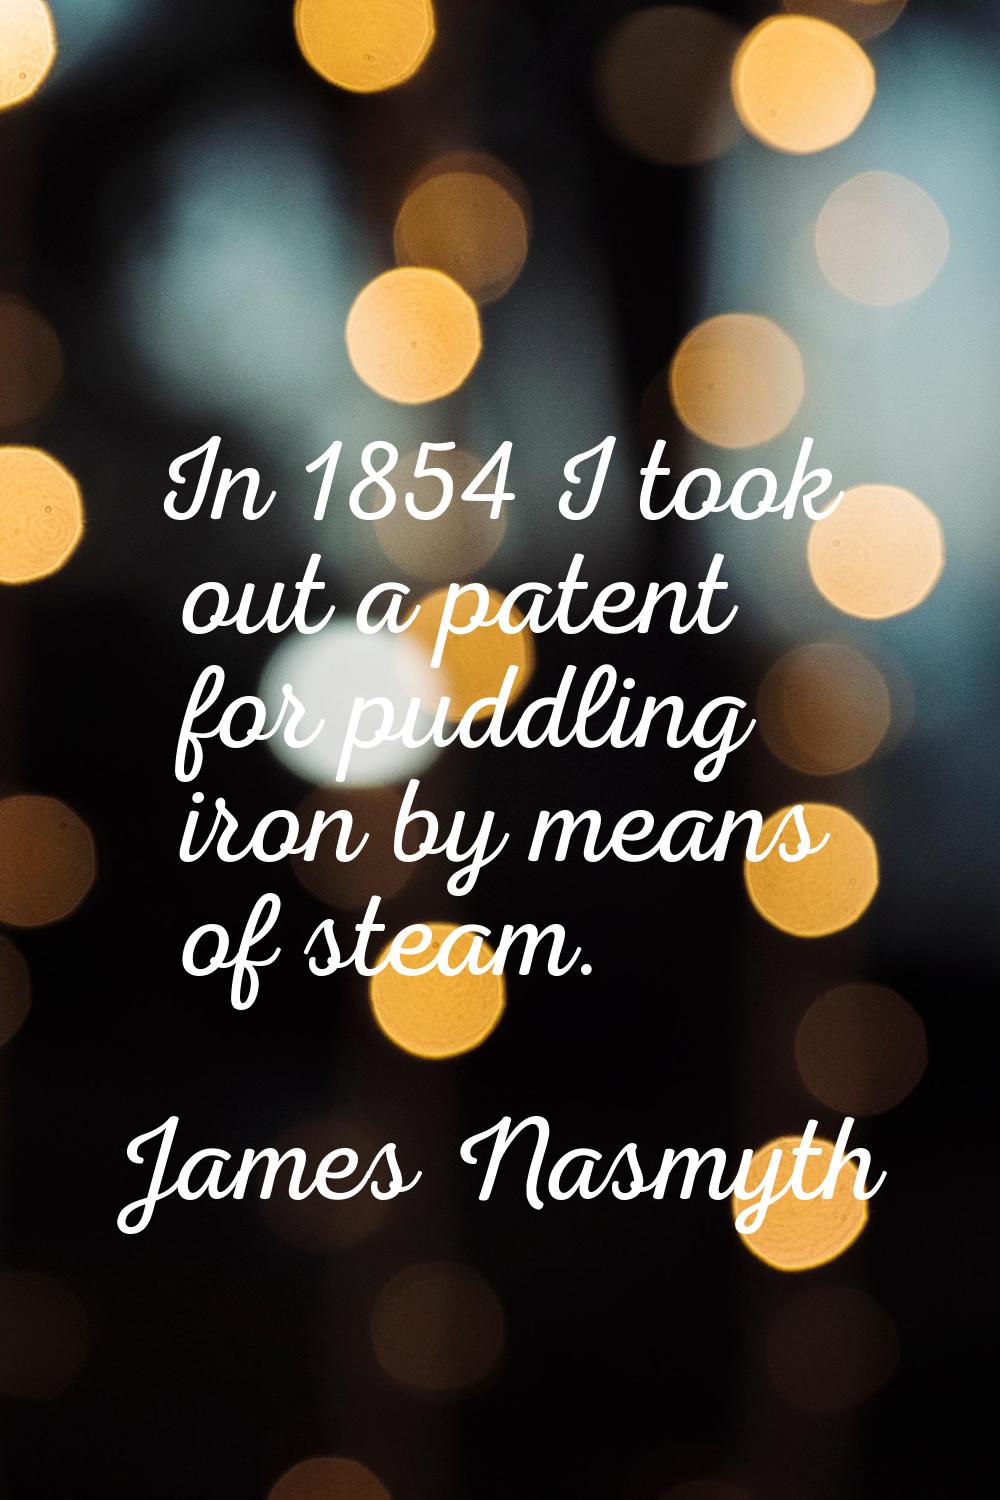 In 1854 I took out a patent for puddling iron by means of steam.